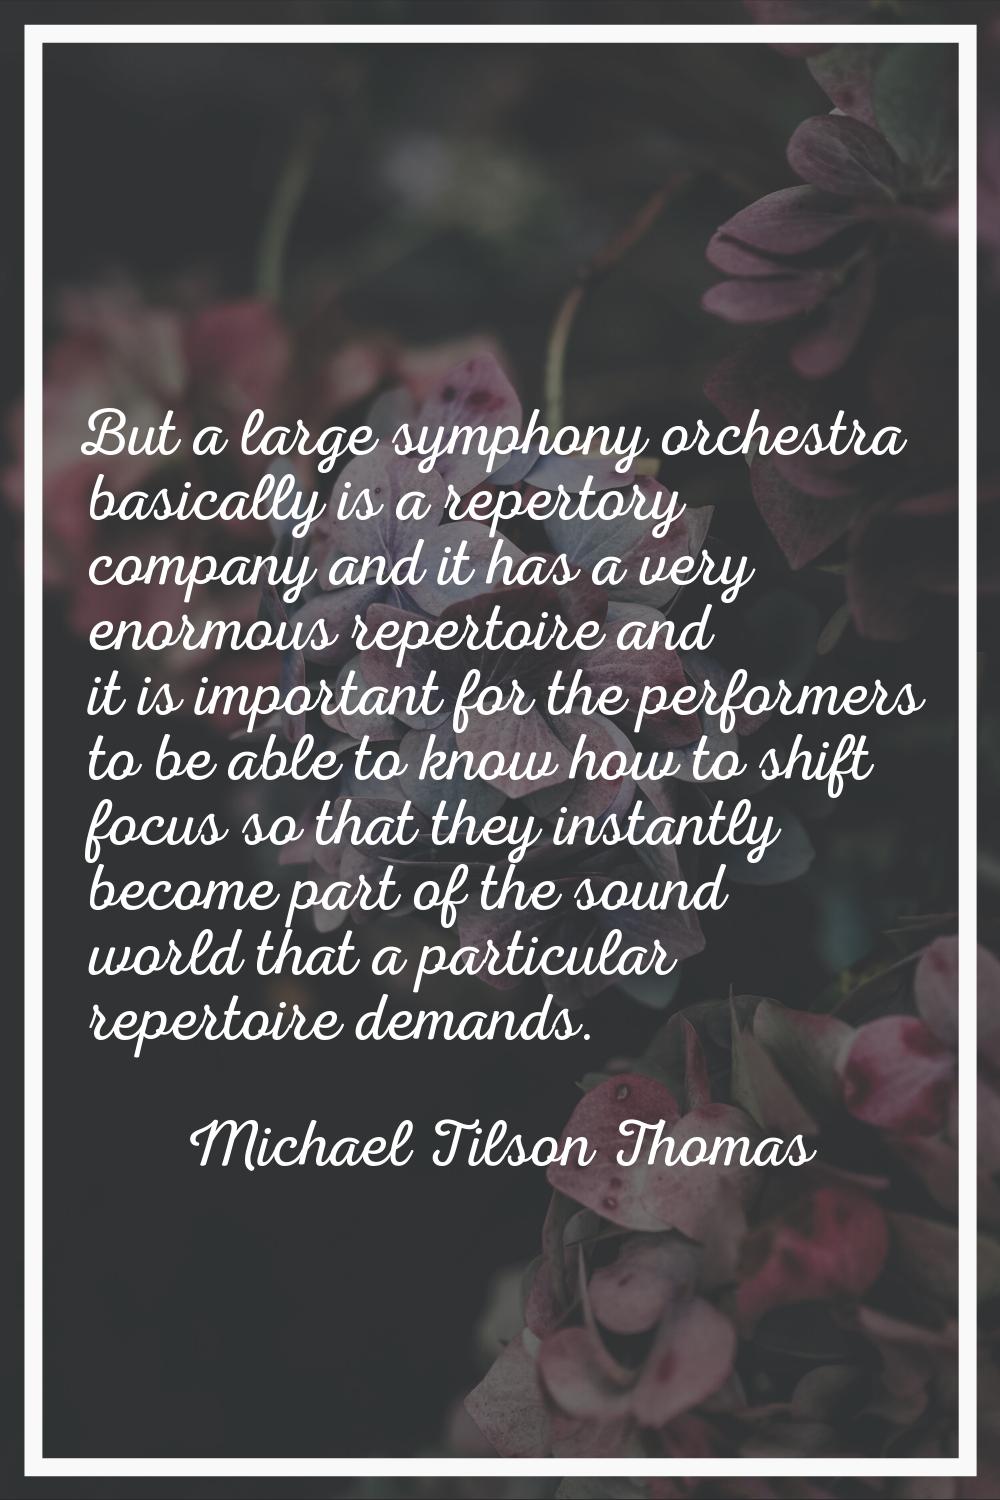 But a large symphony orchestra basically is a repertory company and it has a very enormous repertoi